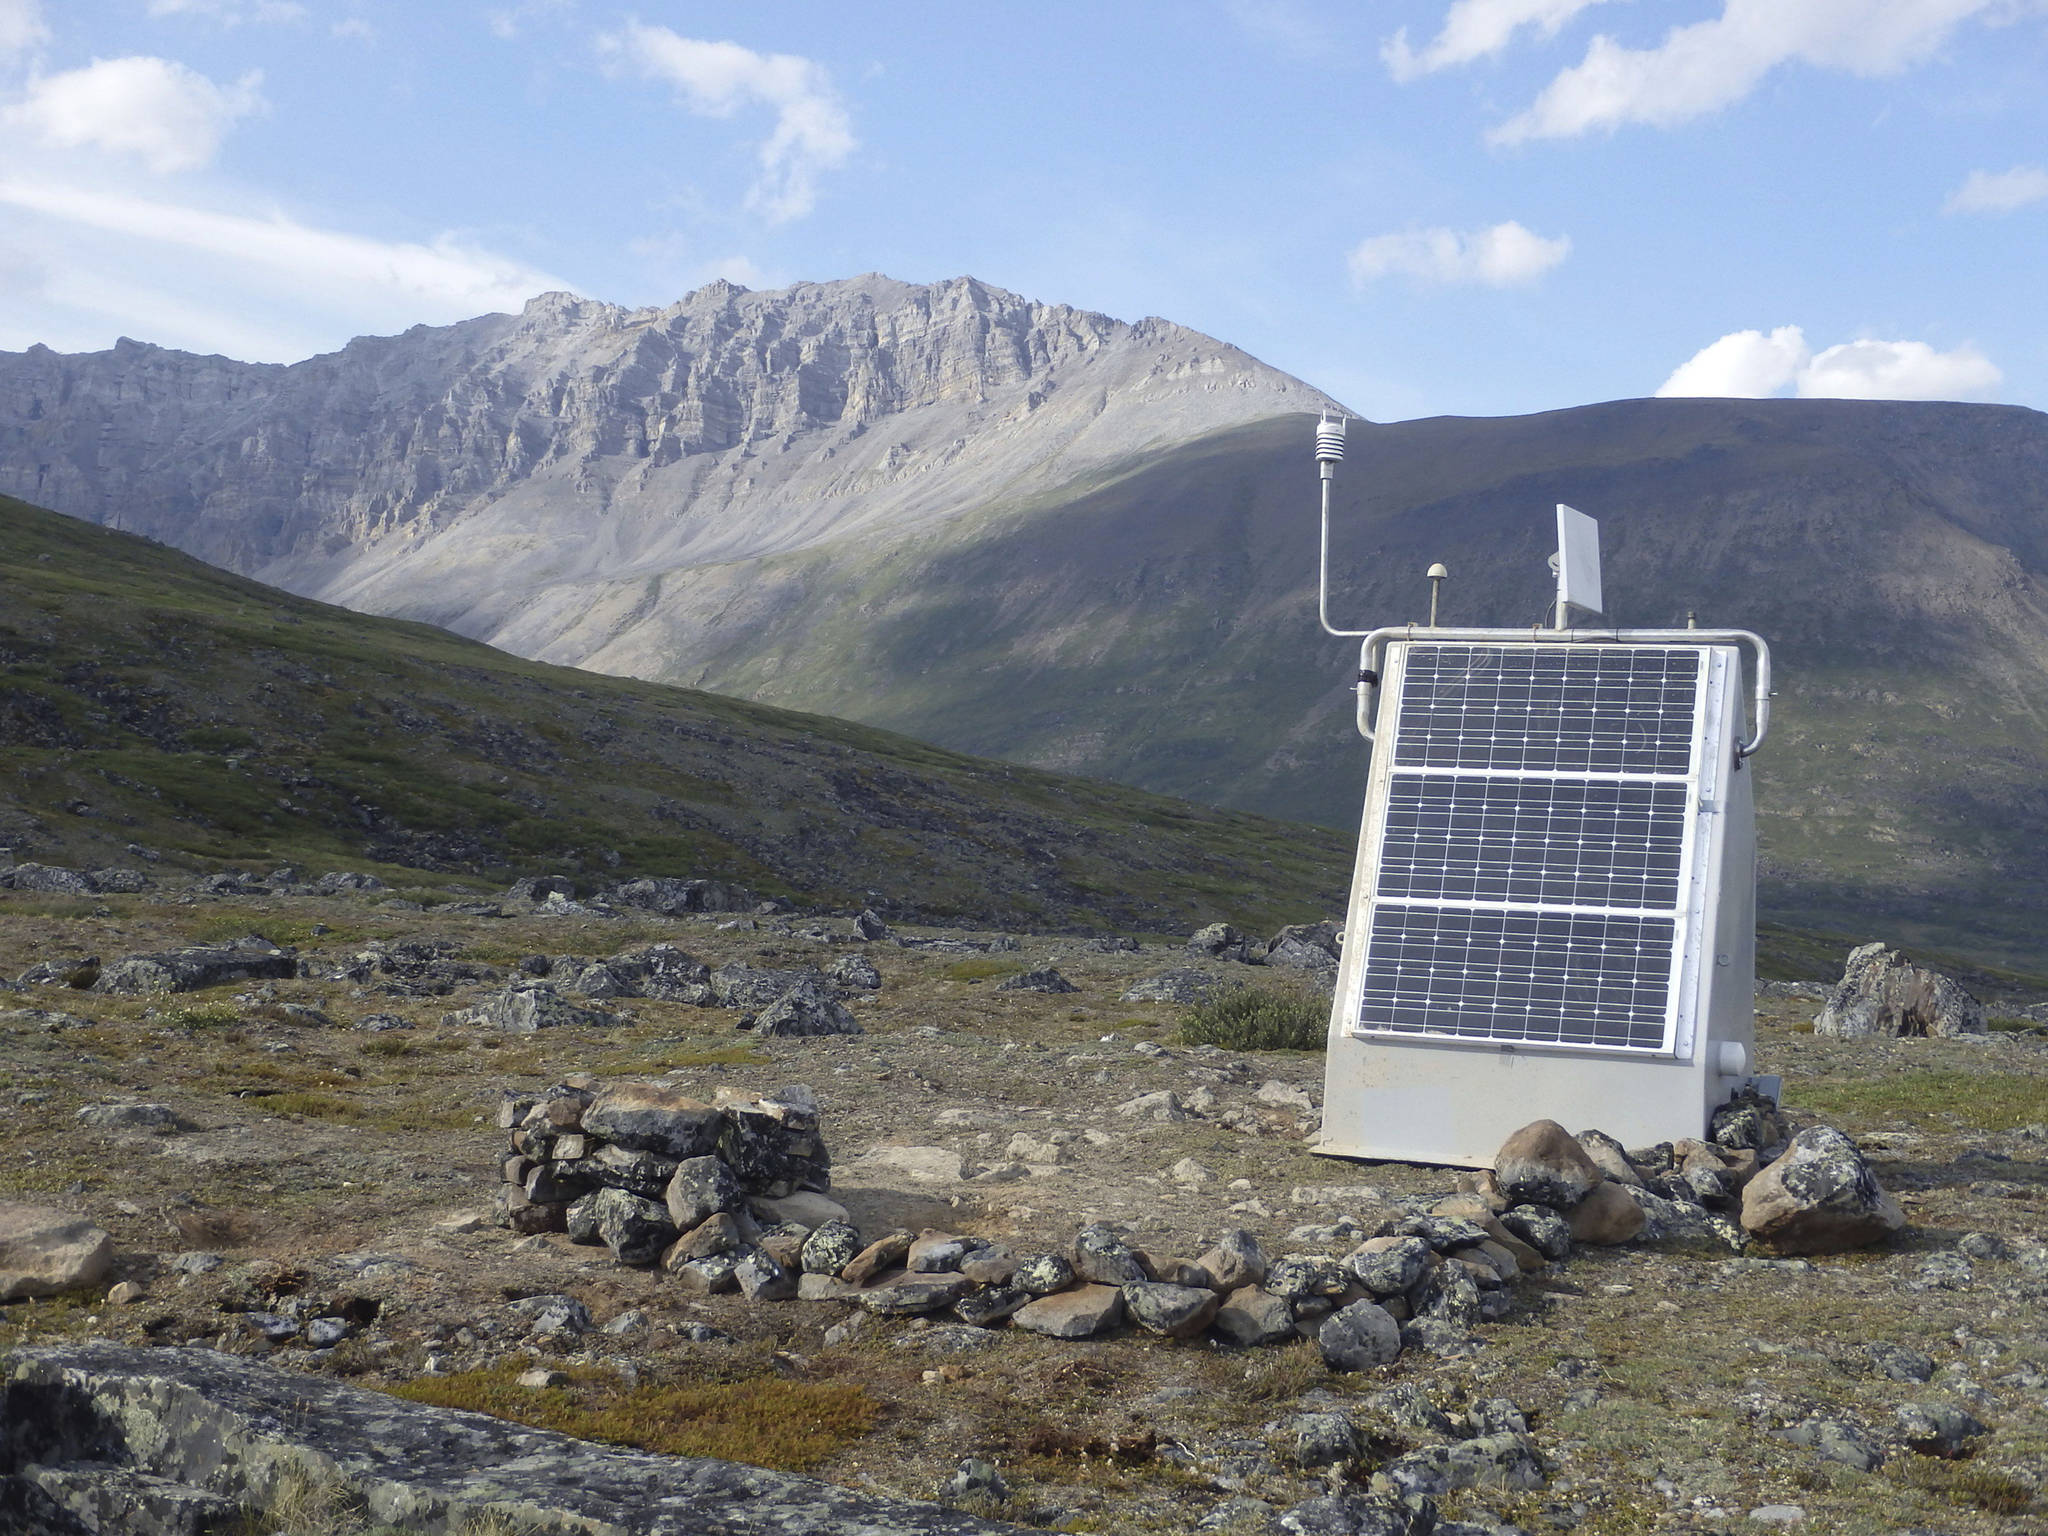 This undated photo provided by Incorporated Research Institutions for Seismology shows a seismic station installed at Anaktuvak Pass in Alaska’s Brooks Range. The station sends out earthquake information in real time. A seismometer rests at the bottom of a borehole and a fiberglass hut equipped with solar panels protects the station power system, electronics and radio telemetry equipment. (Incorporated Research Institutions for Seismology via AP)